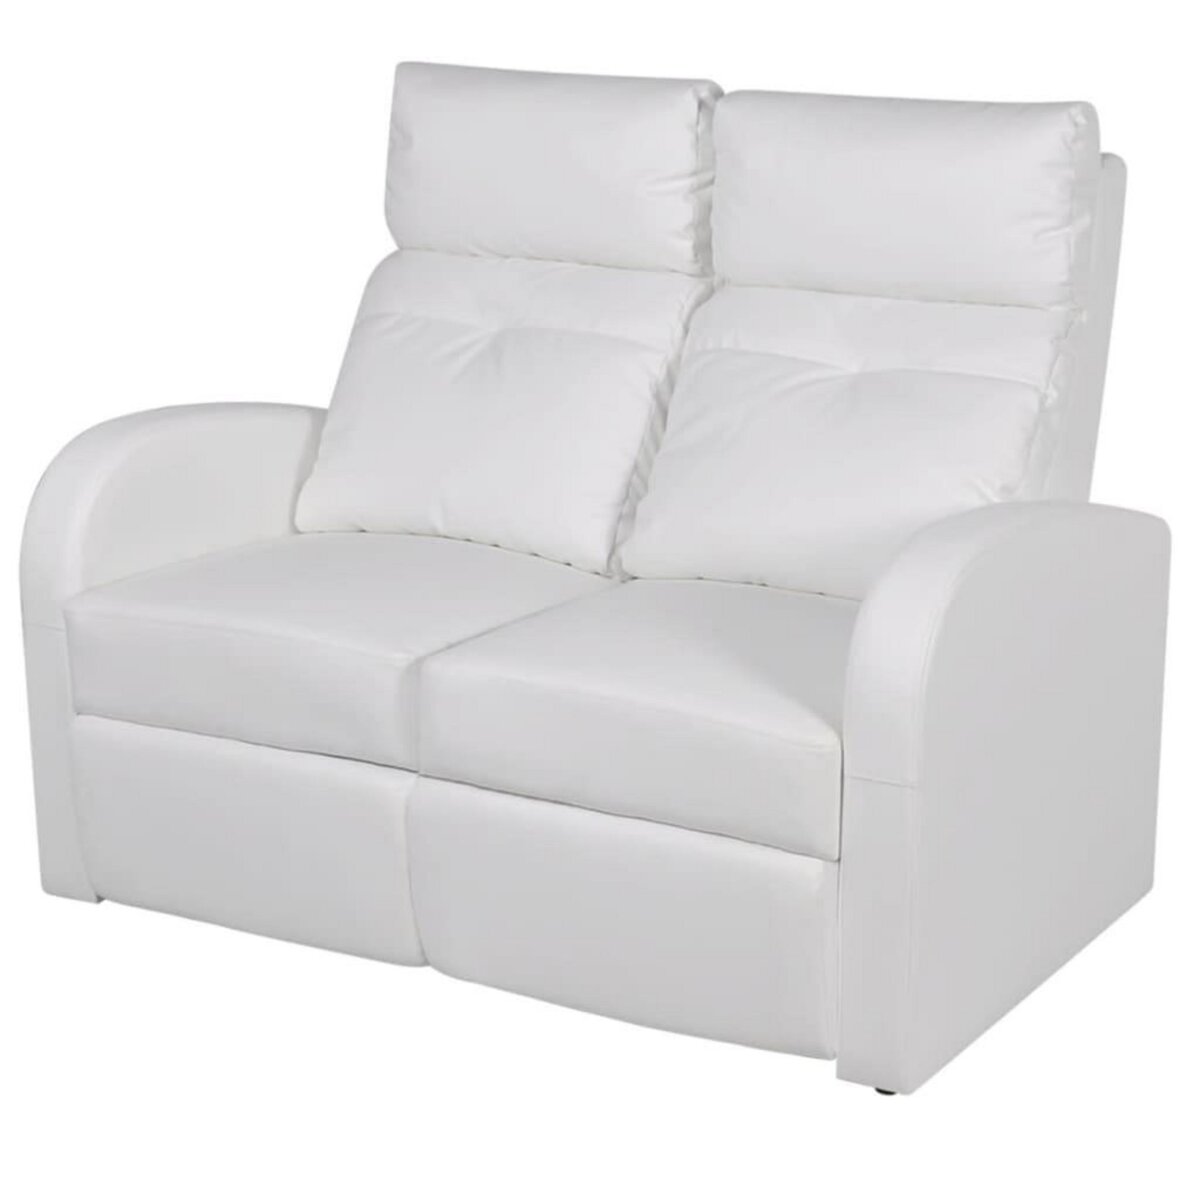 VIDAXL Fauteuil inclinable a 2 places Cuir synthetique Blanc